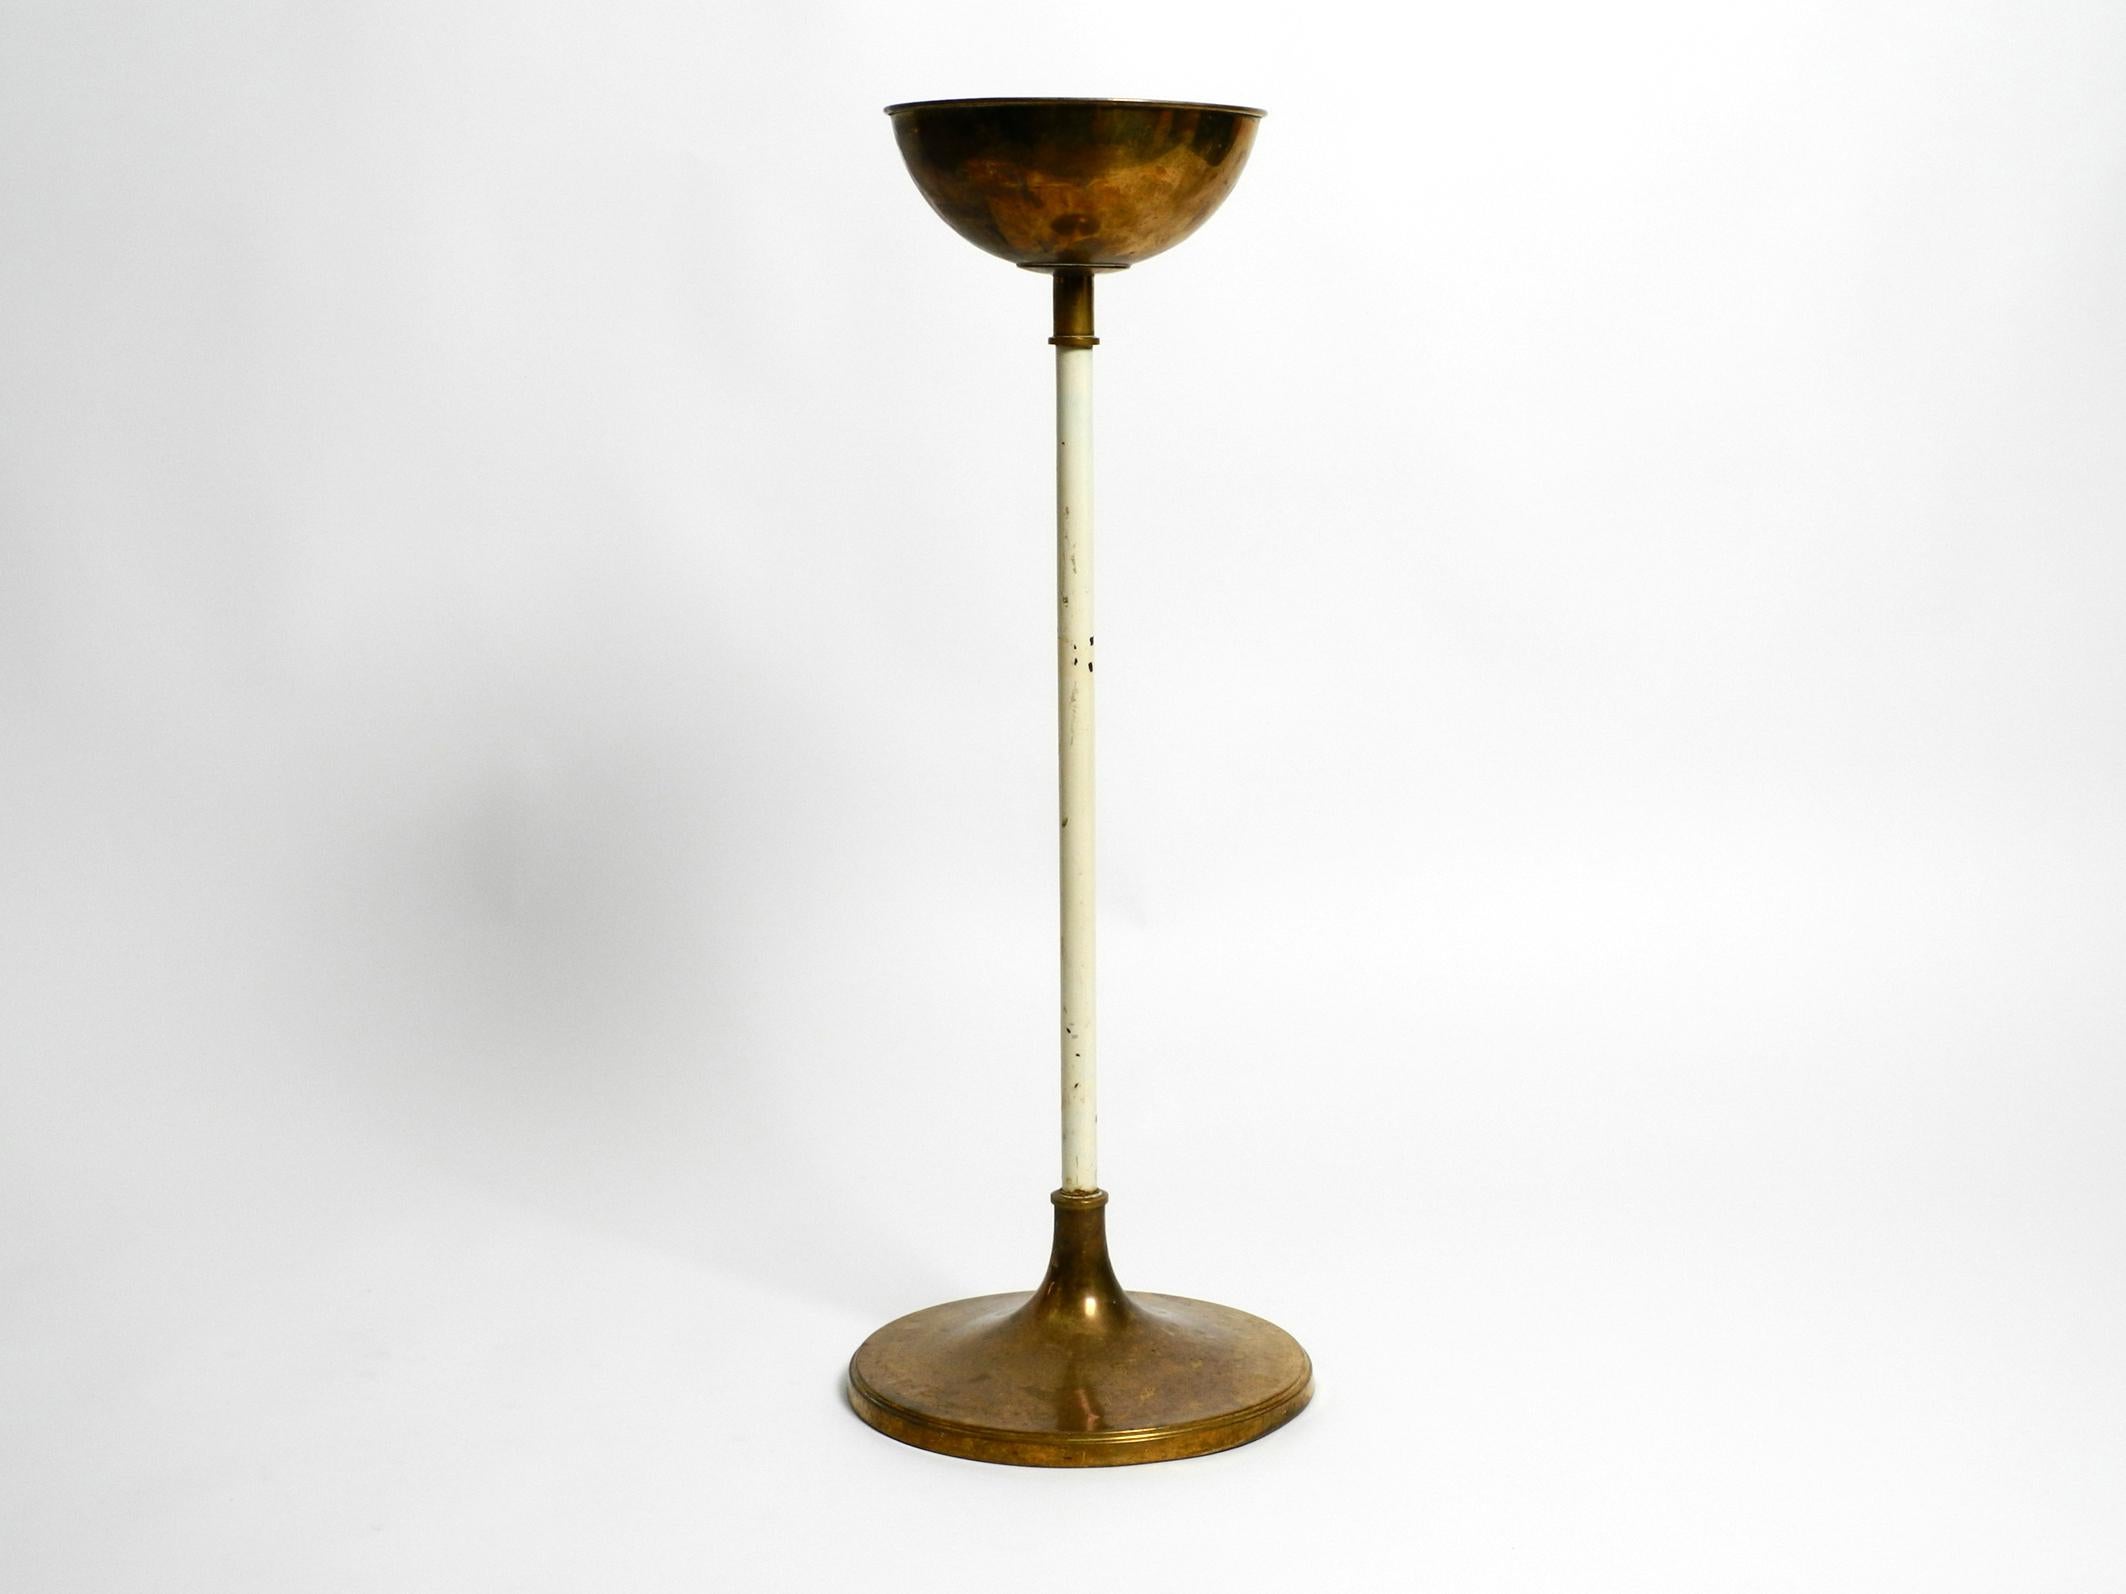 Beautiful large heavy Mid-Century Modern brass holy water stand by Vereinigte Werkstätten.
Manufactured by Vereinigte Werkstätten in the 1950s. Made in Germany.
Design typical for that time. Elaborately and solidly built for eternity.
The brass